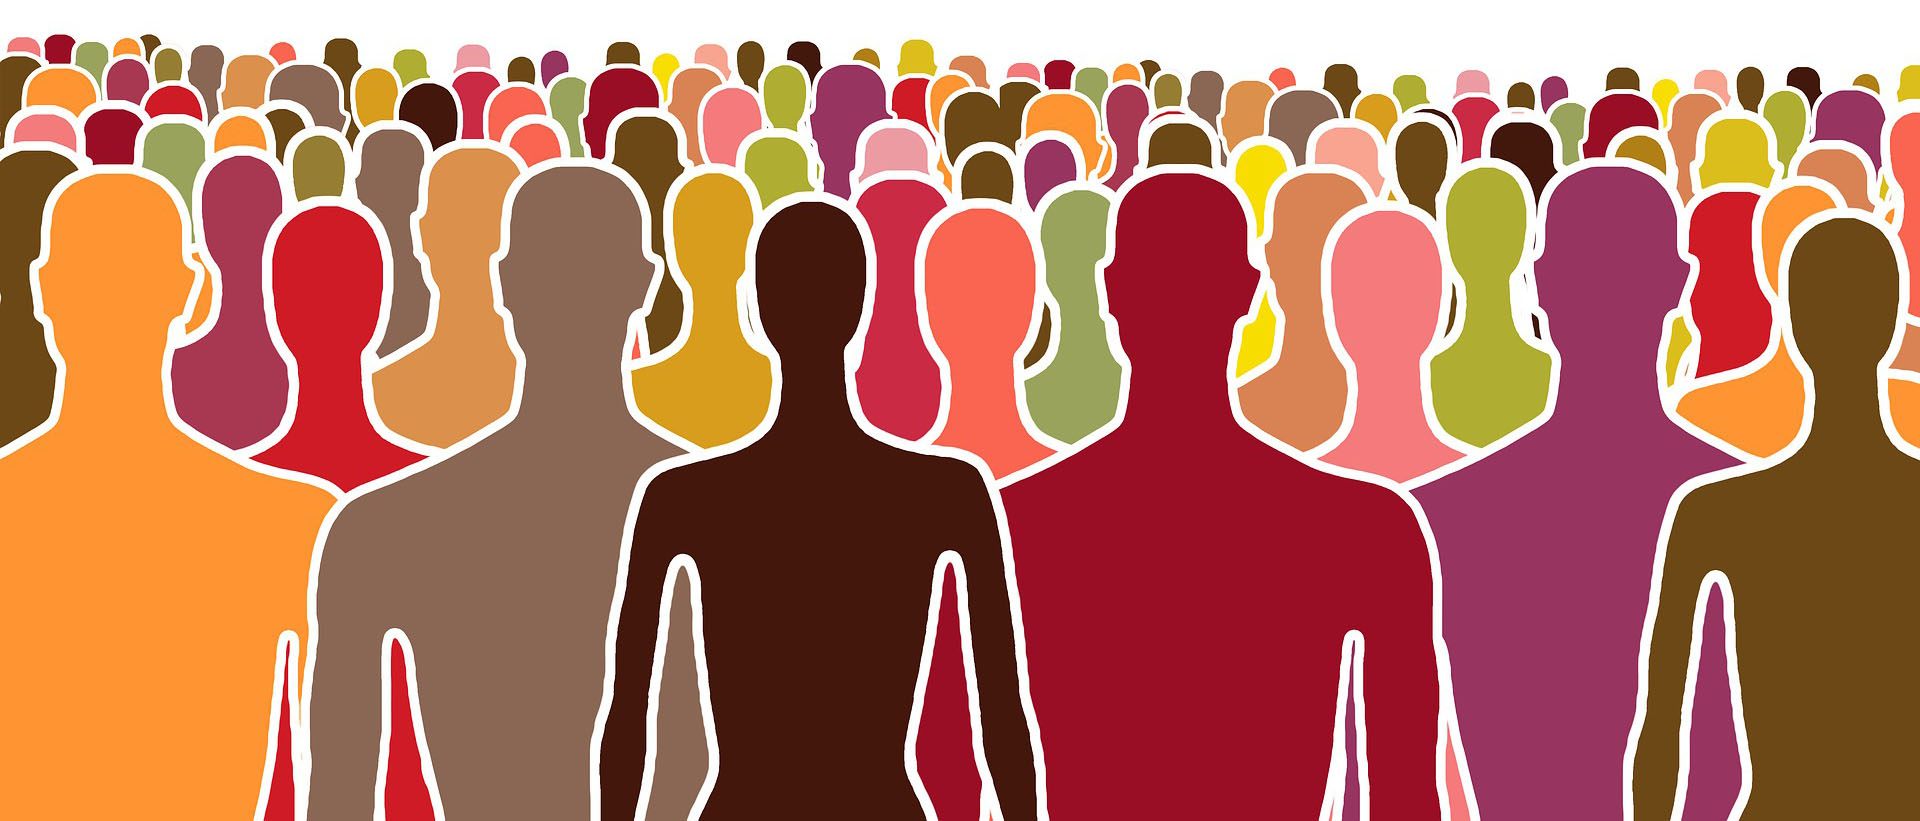 computer-generated illustration of different color silhouette multiple people.